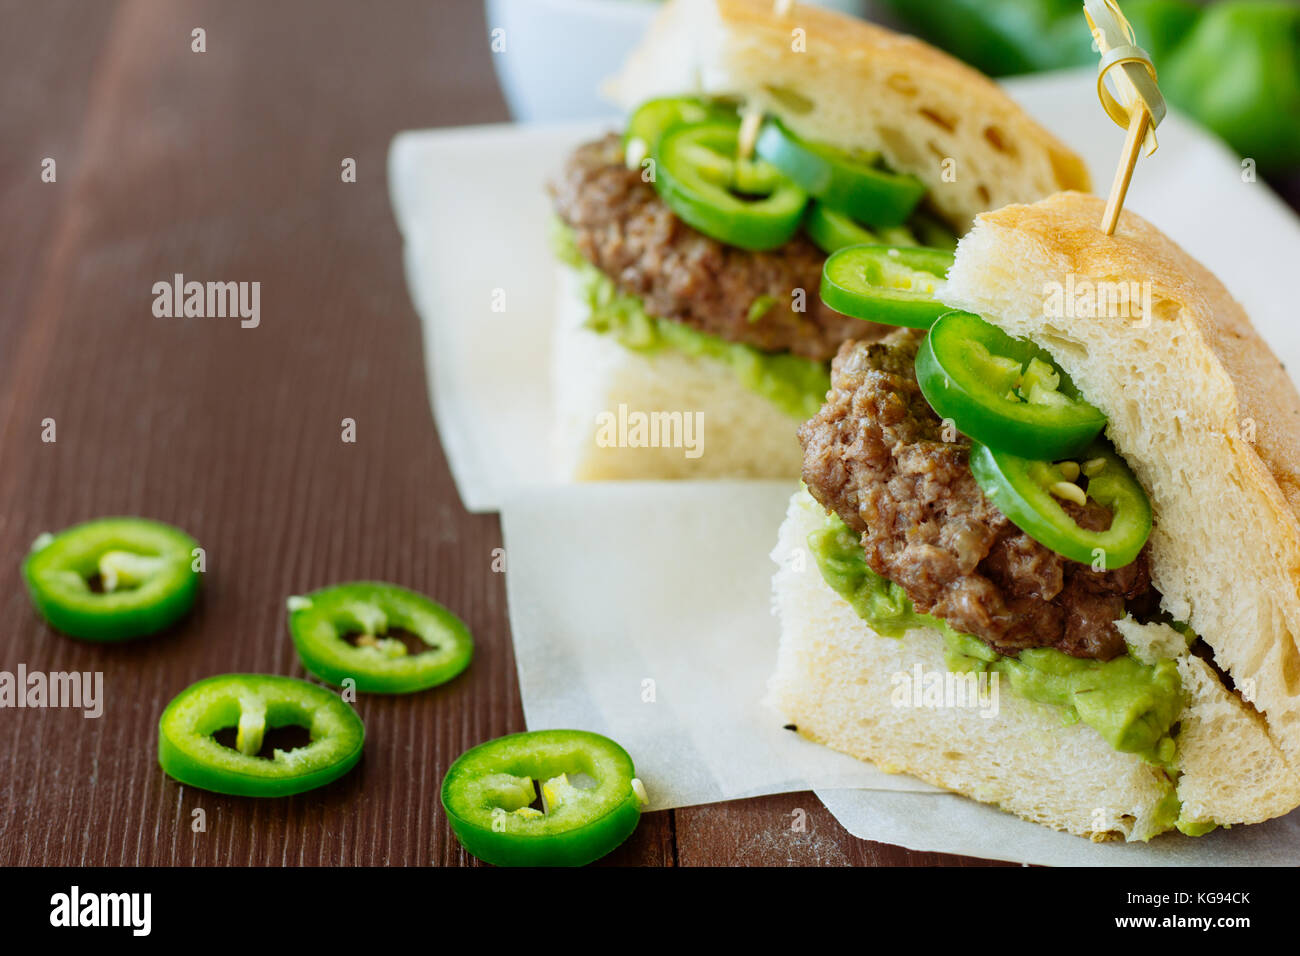 Hamburgers with avocado paste and chili selective focus Stock Photo